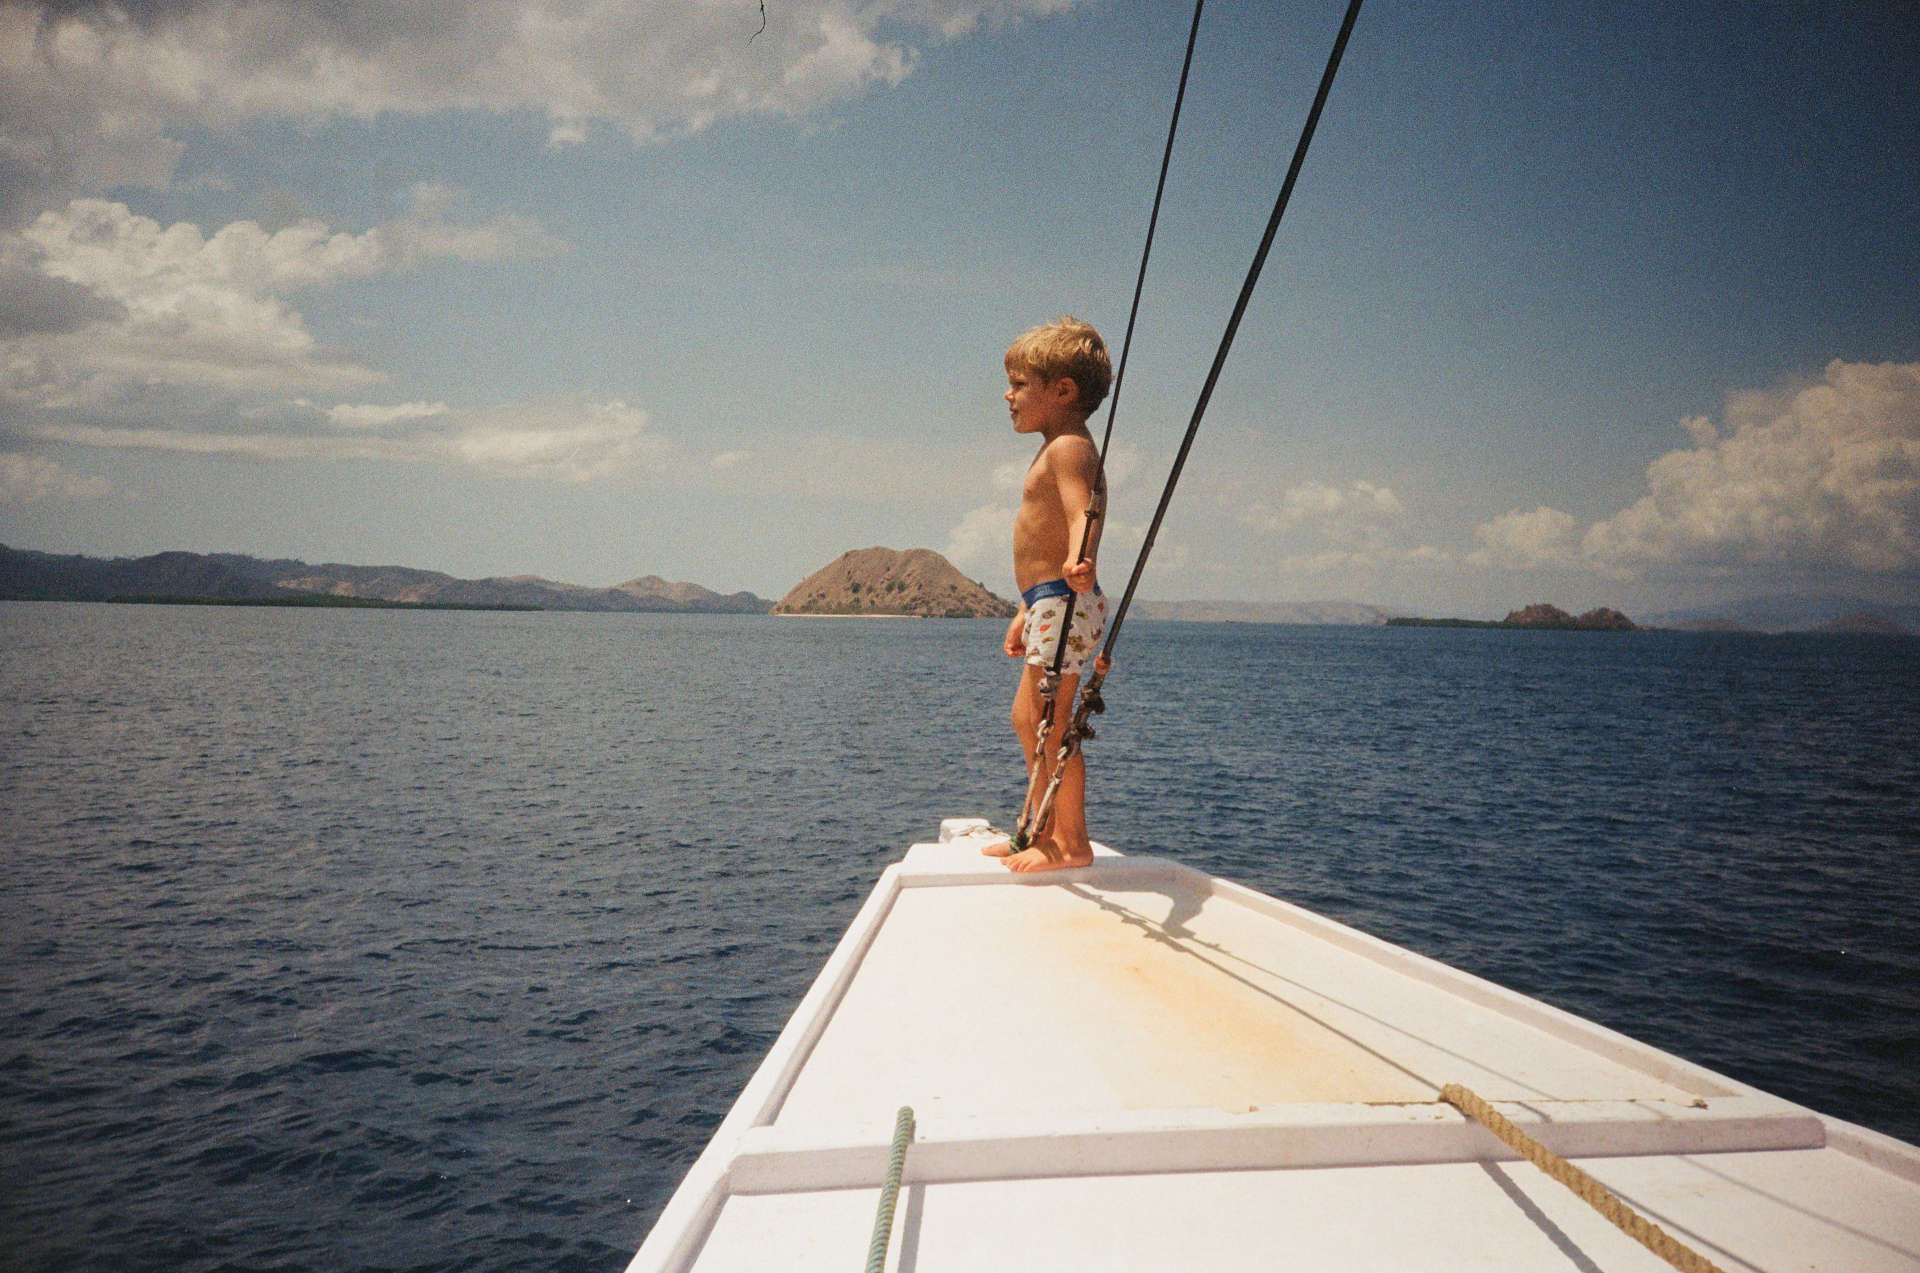 Essential guide for sailing with kids